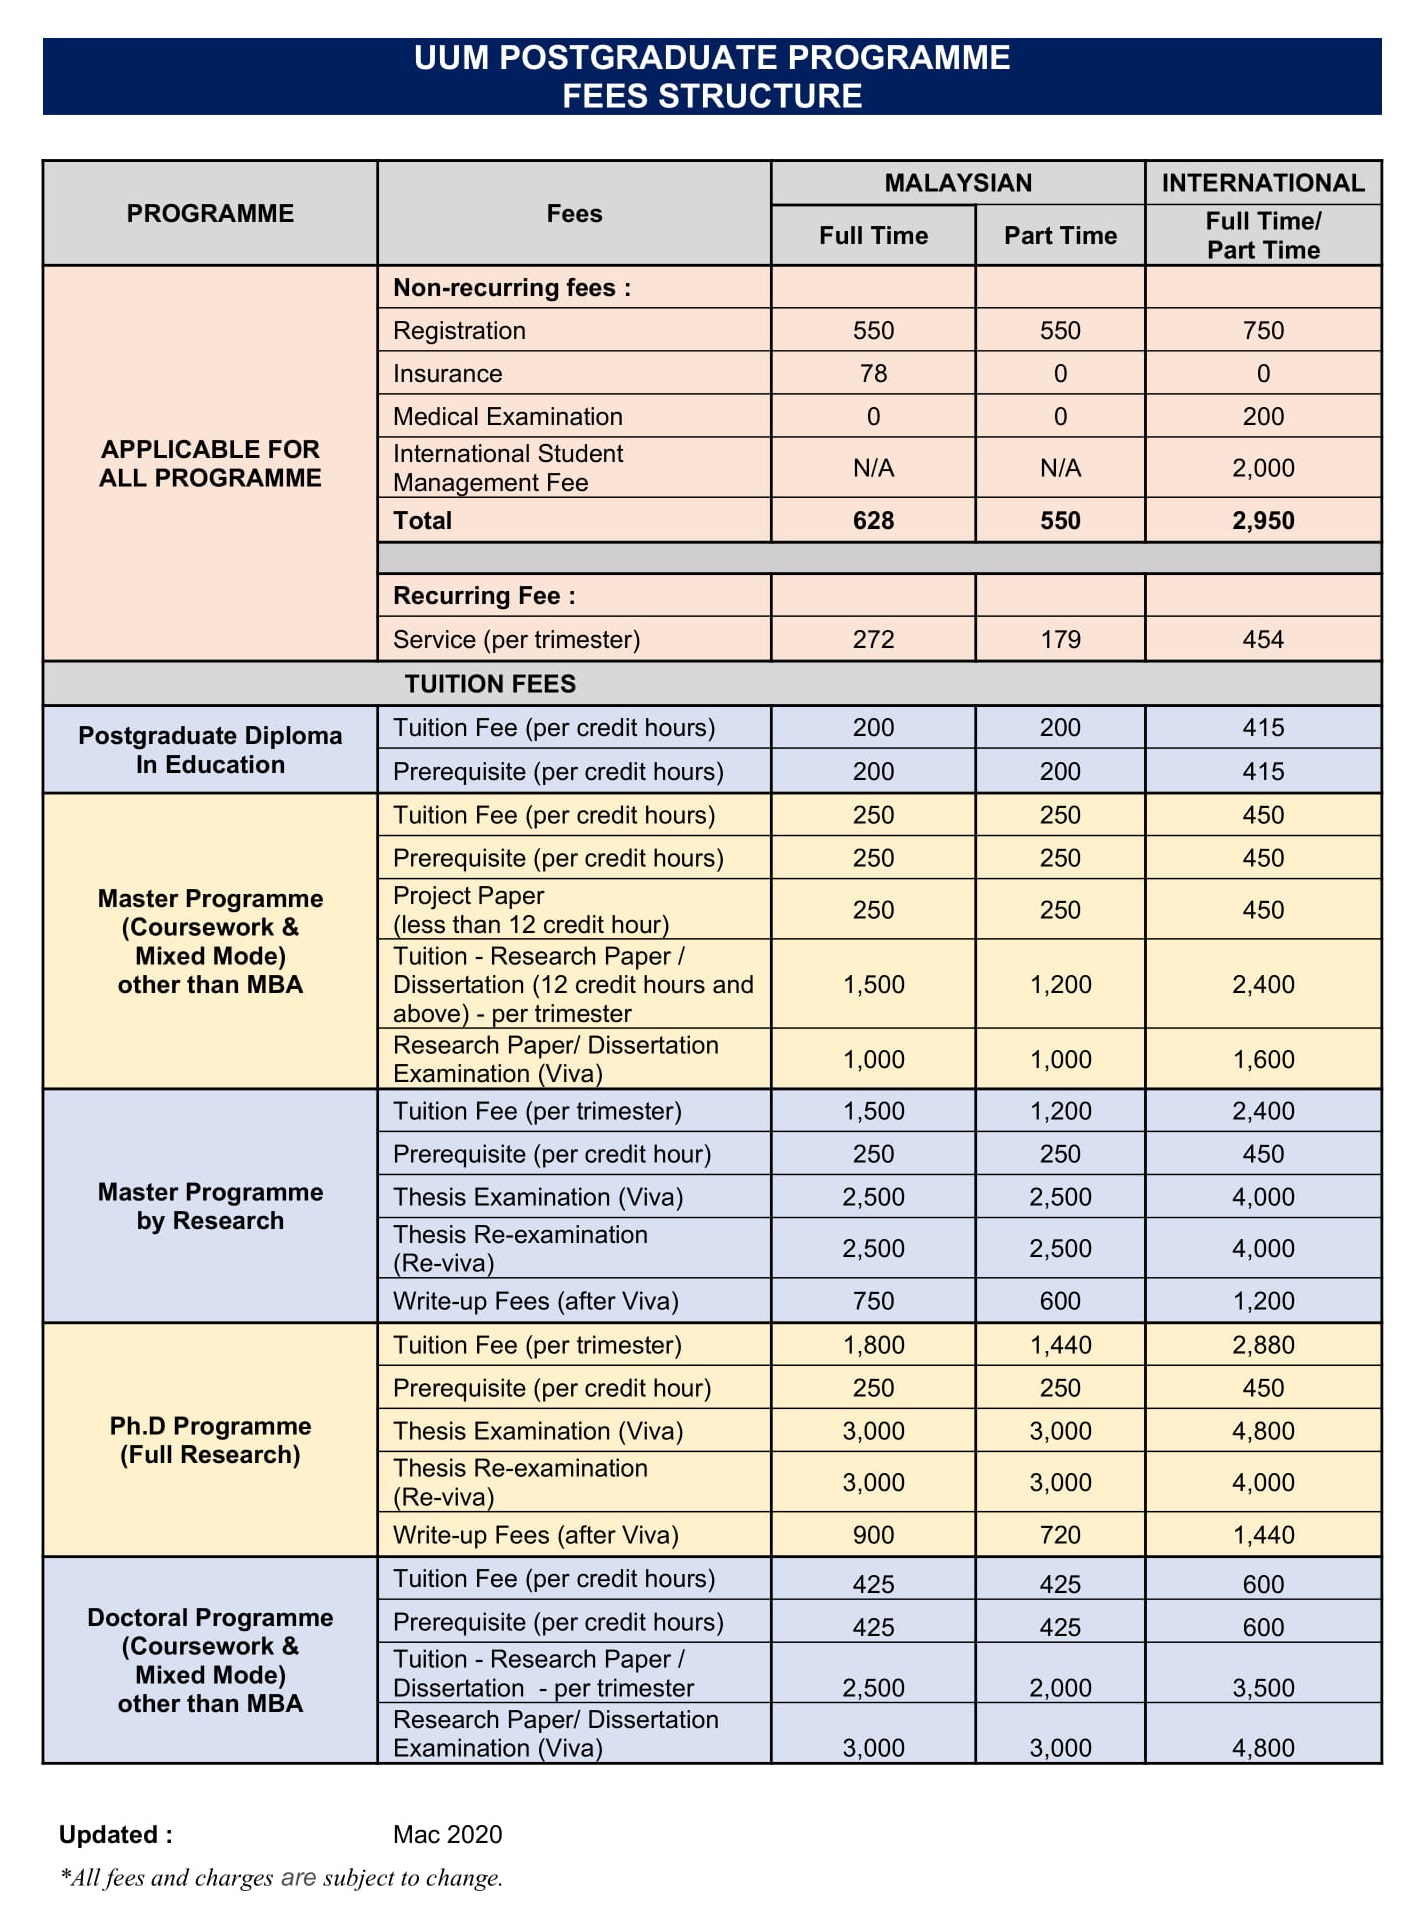 FEES STRUCTURE ALL PG PROGRAMME 1942020 1